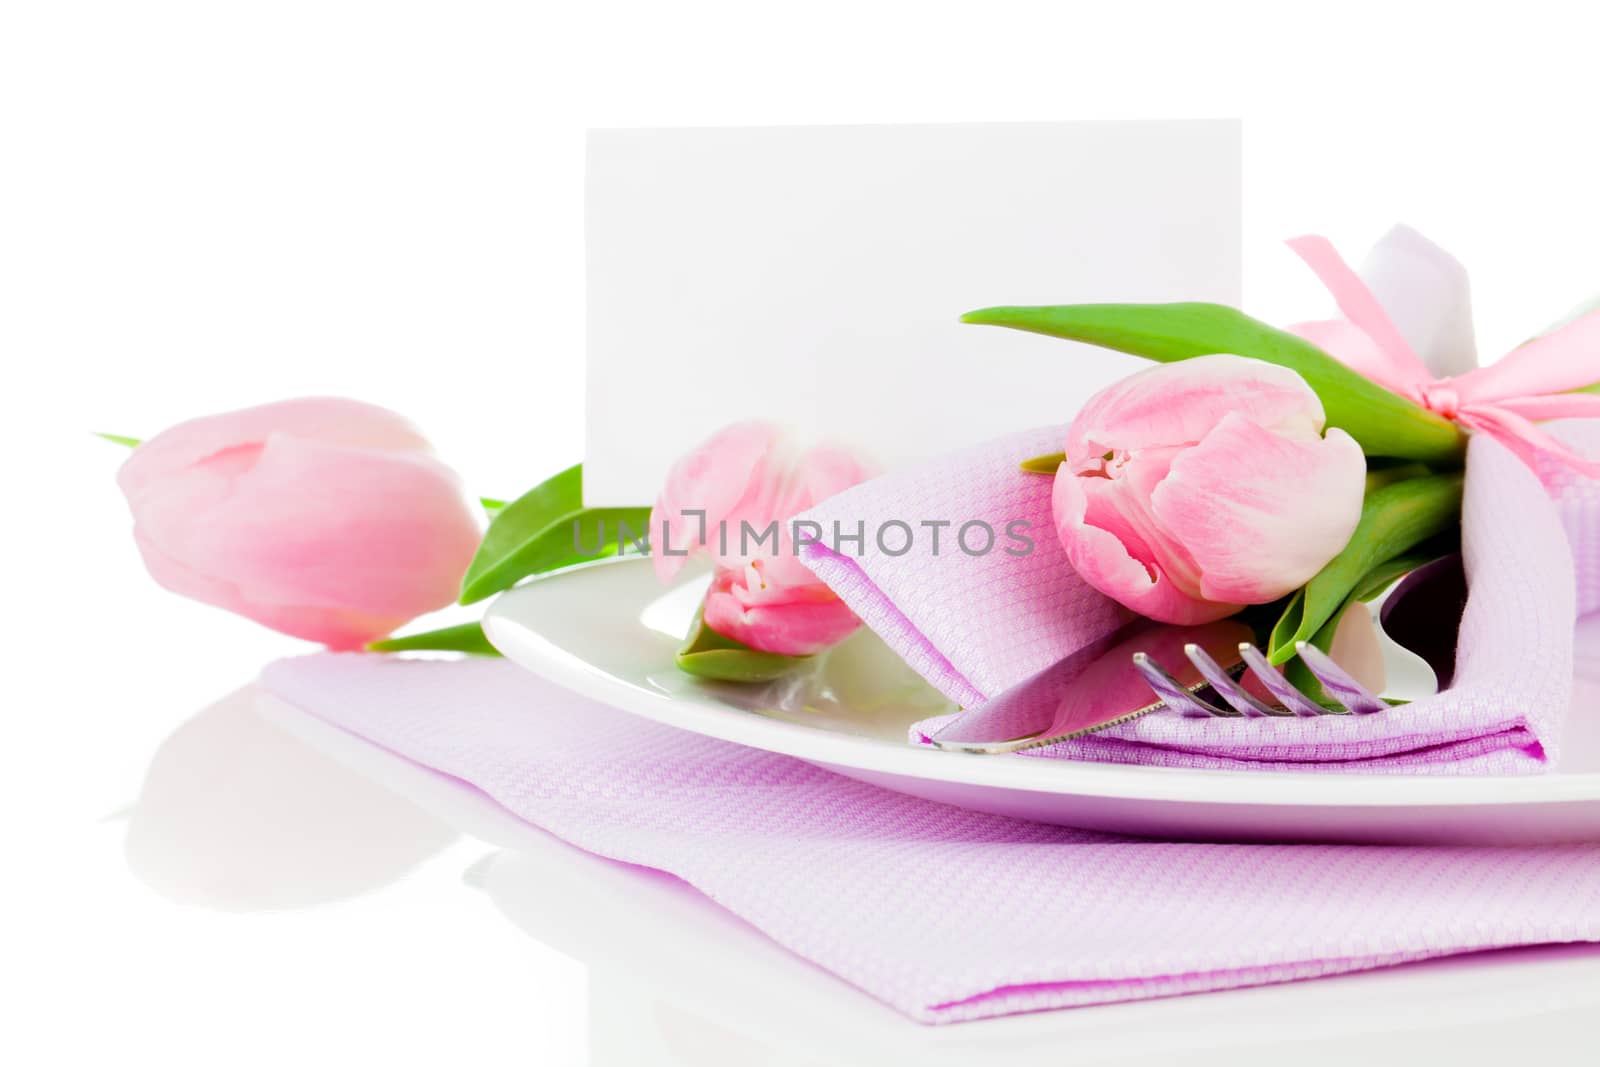 pink tulips in a plate, on a white background. romantic still life with fresh flowers